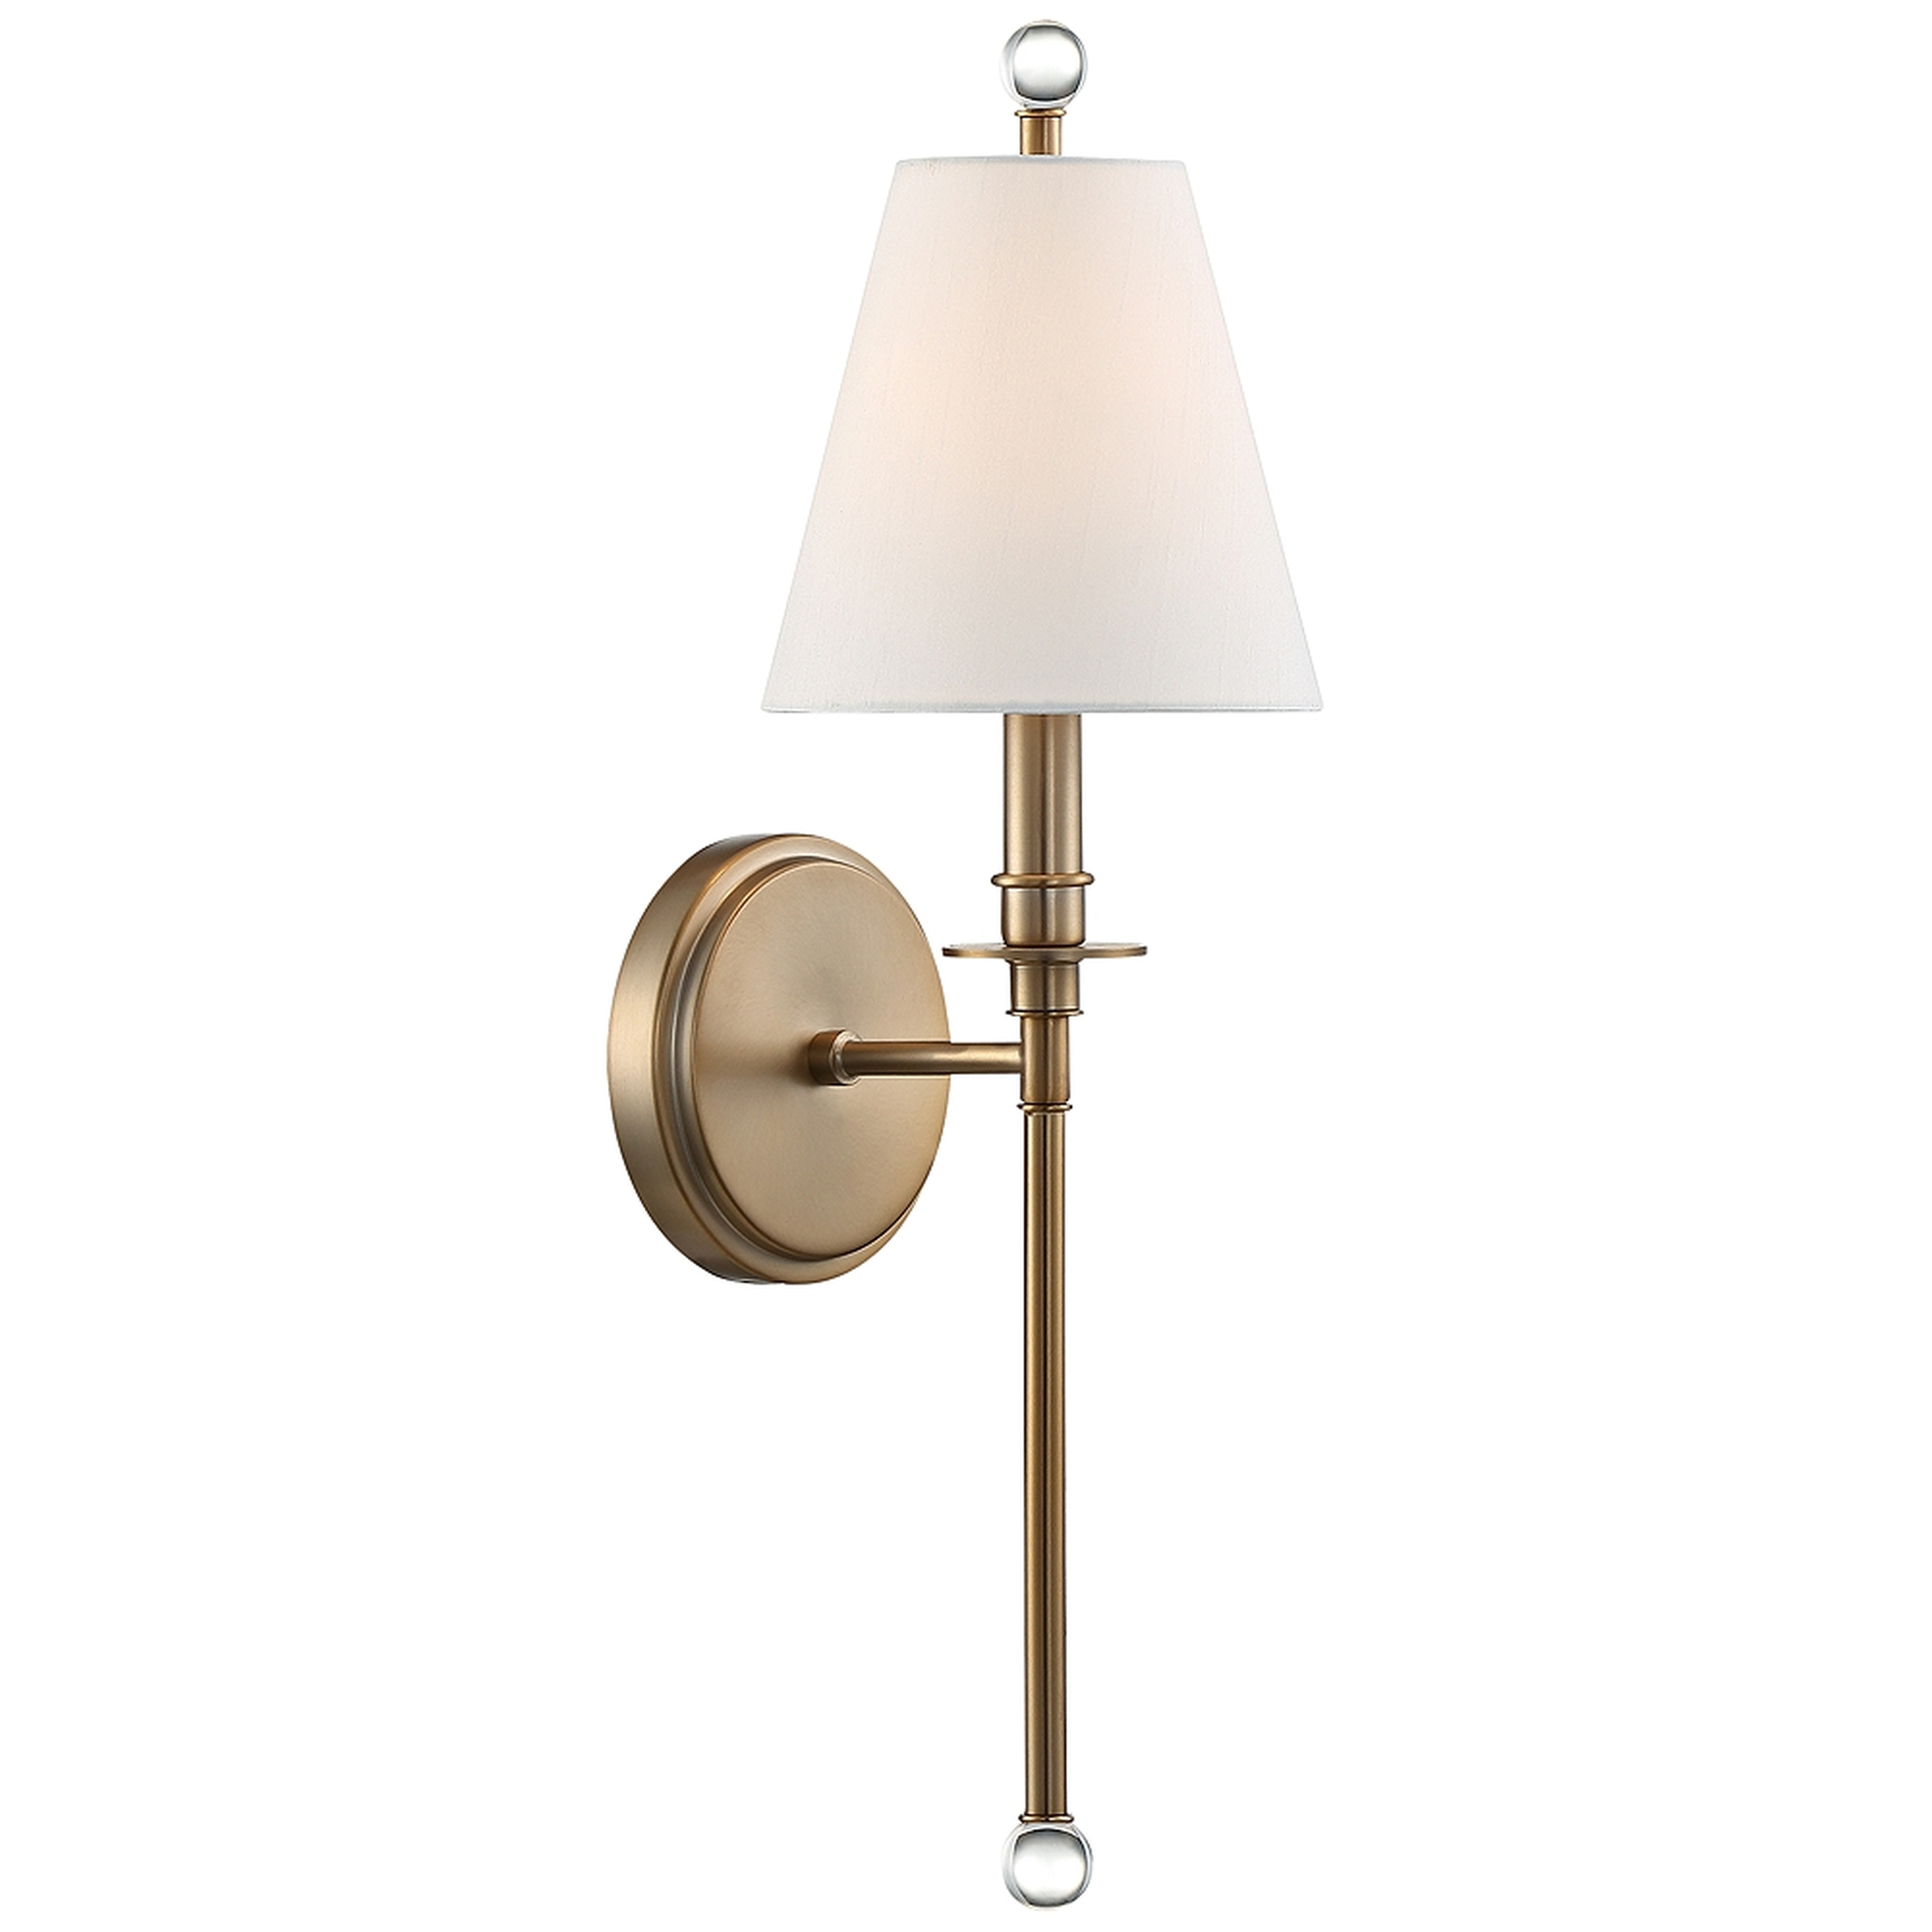 Crystorama Riverdale 14 1/2" High Aged Brass Wall Sconce - Style # 55V16 - Lamps Plus